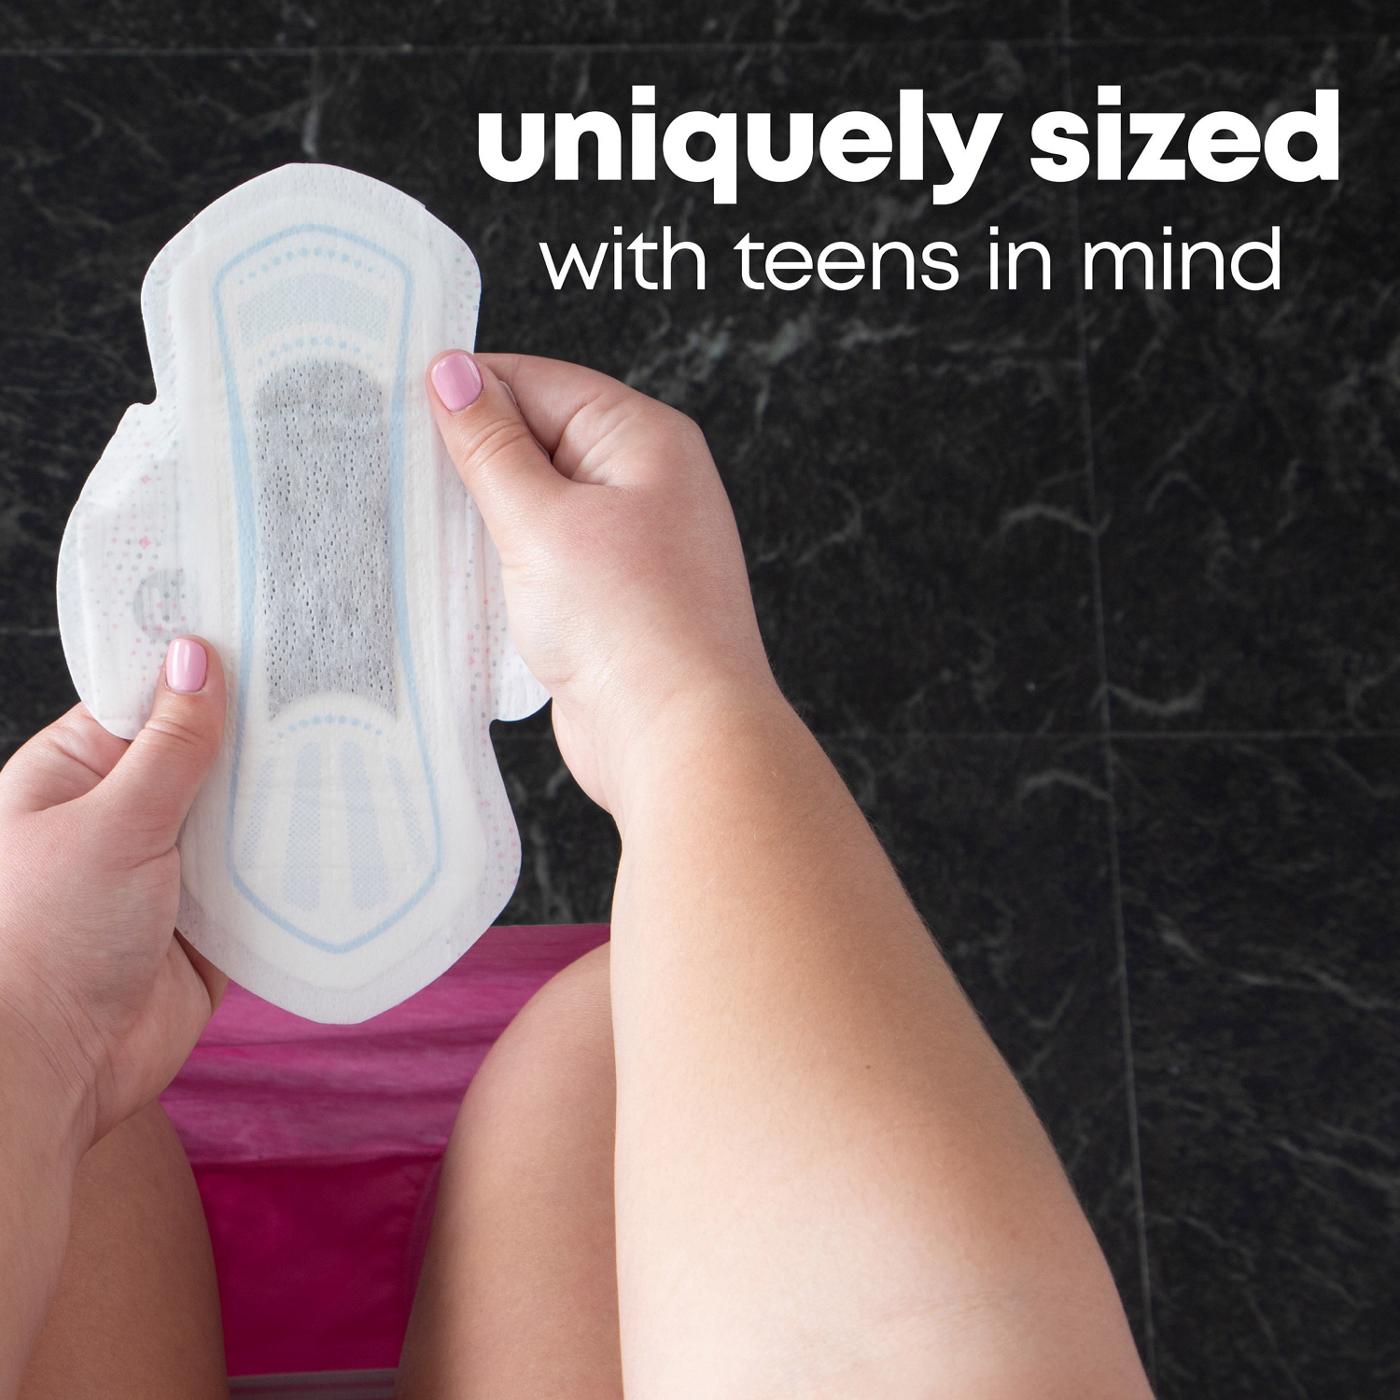 U by Kotex Balance - Sized for Teens Ultra Thin Pads with Wings - Heavy Absorbency; image 5 of 7